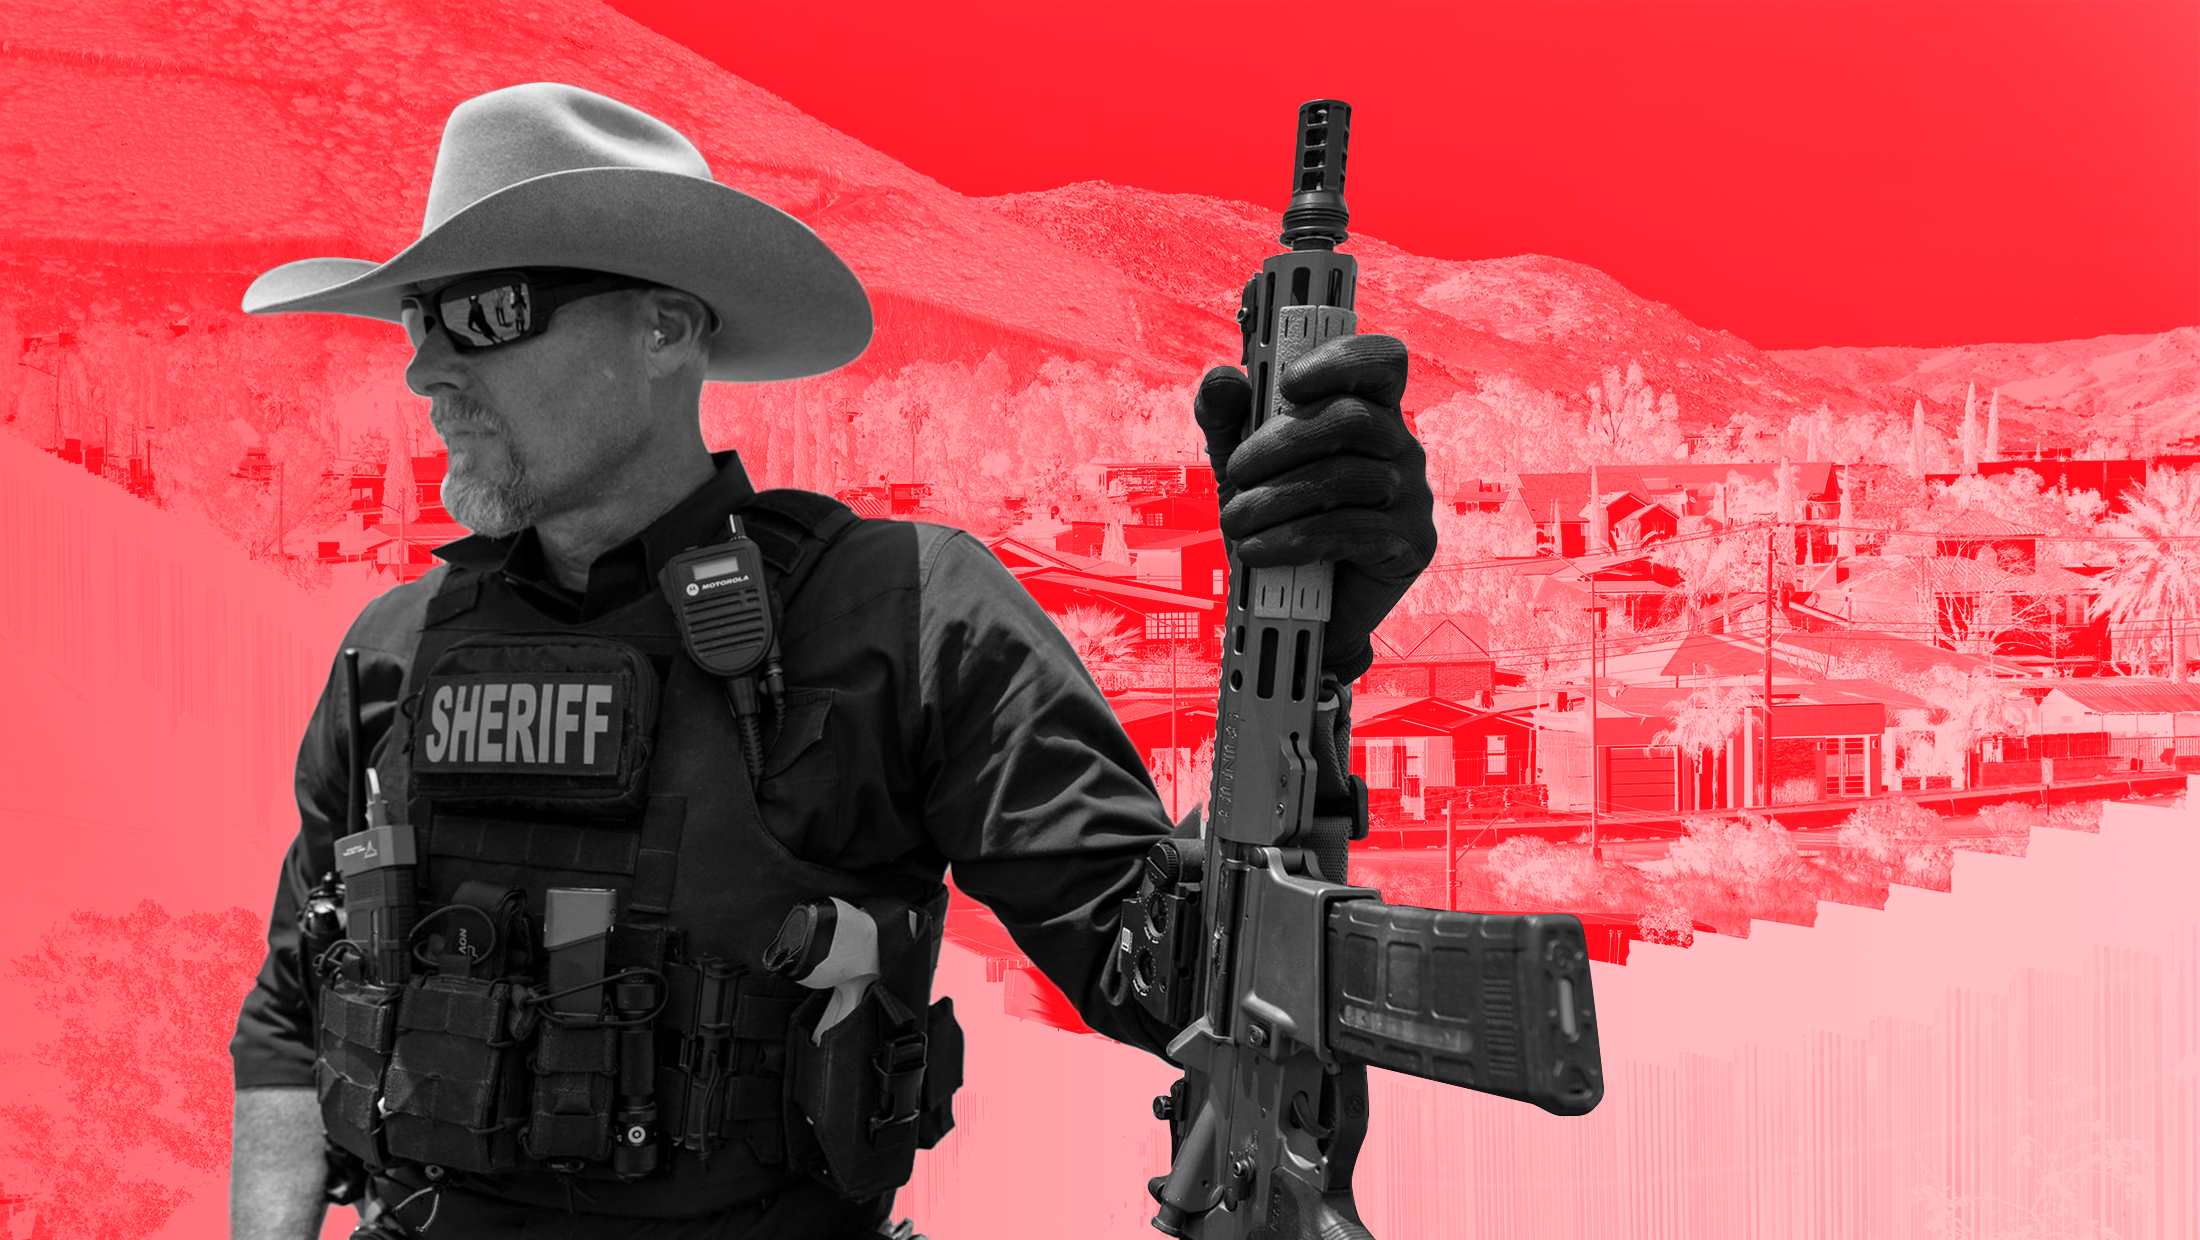 Red background with black and white toned image of Pinal County, Arizona Sheriff Mark Lamb in his uniform and holding a gun in front of a backdrop of the U.S.-Mexico border.